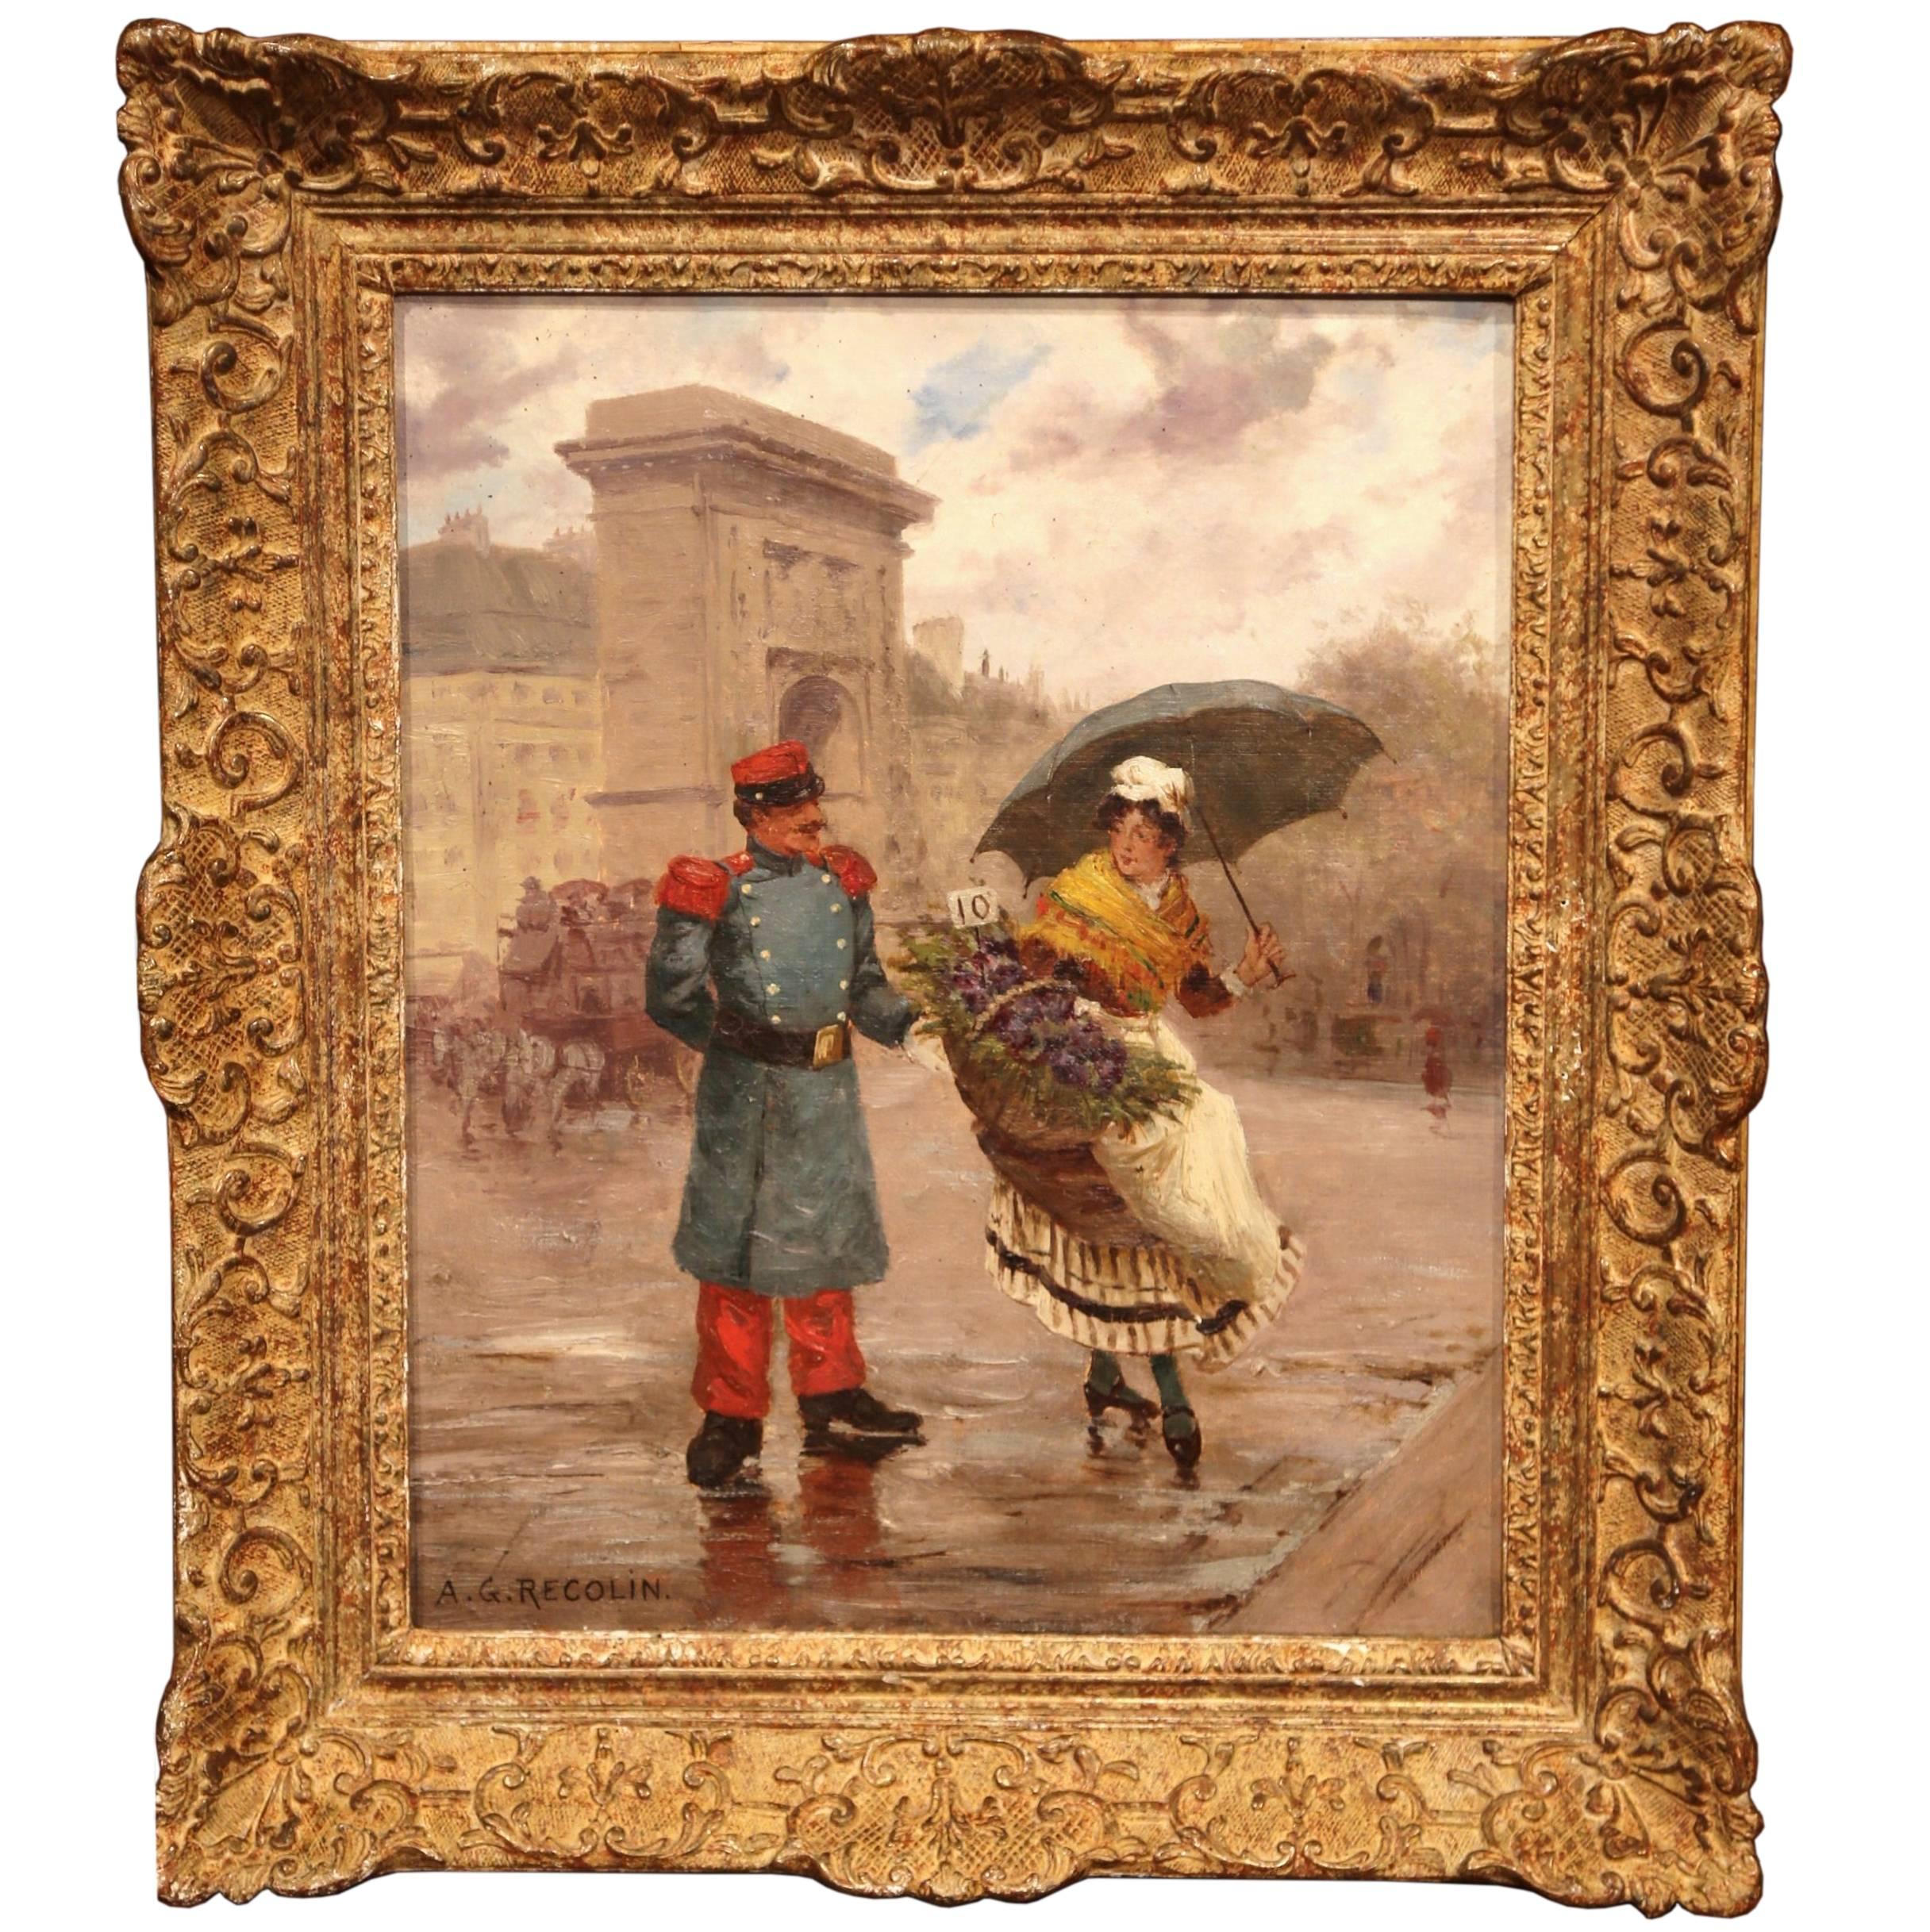 Unknown Figurative Painting - 19th Century French Oil on Canvas Painting in Gilt Wood Frame Signed Recolin